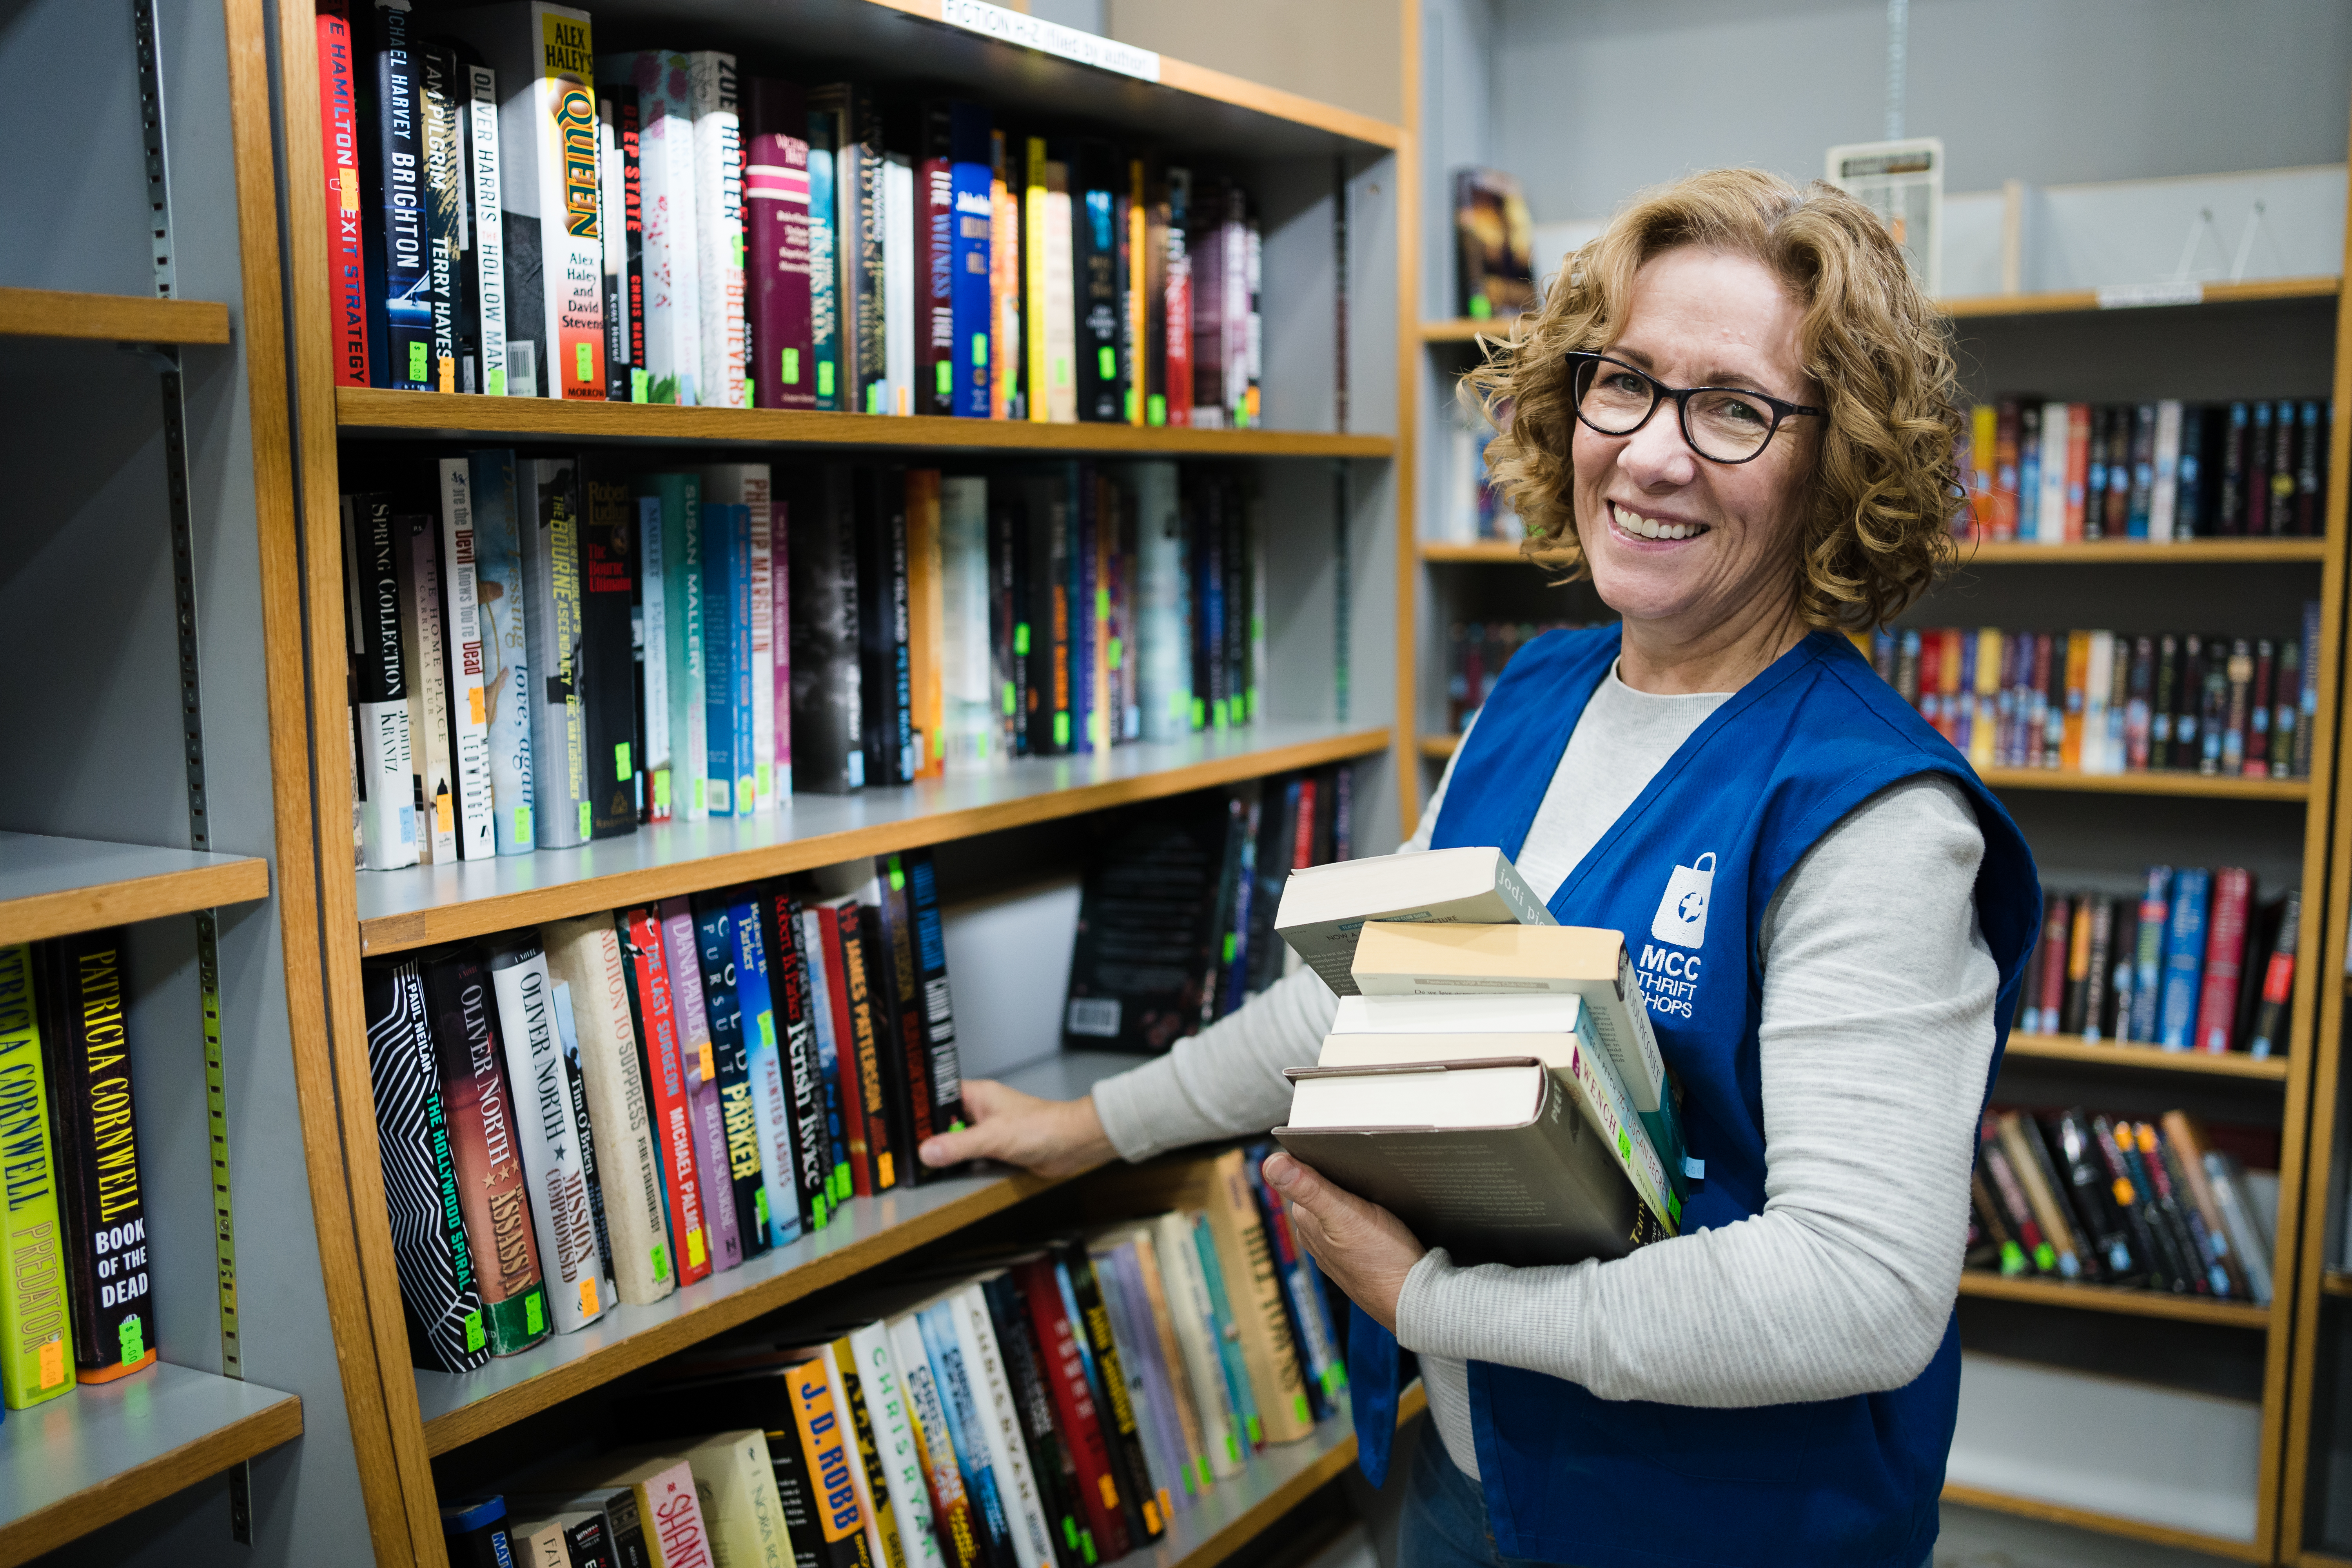 Volunteer Trudy Leiding restocks and organizes the shelves of the book department at the Calgary MCC Thrift Shop.